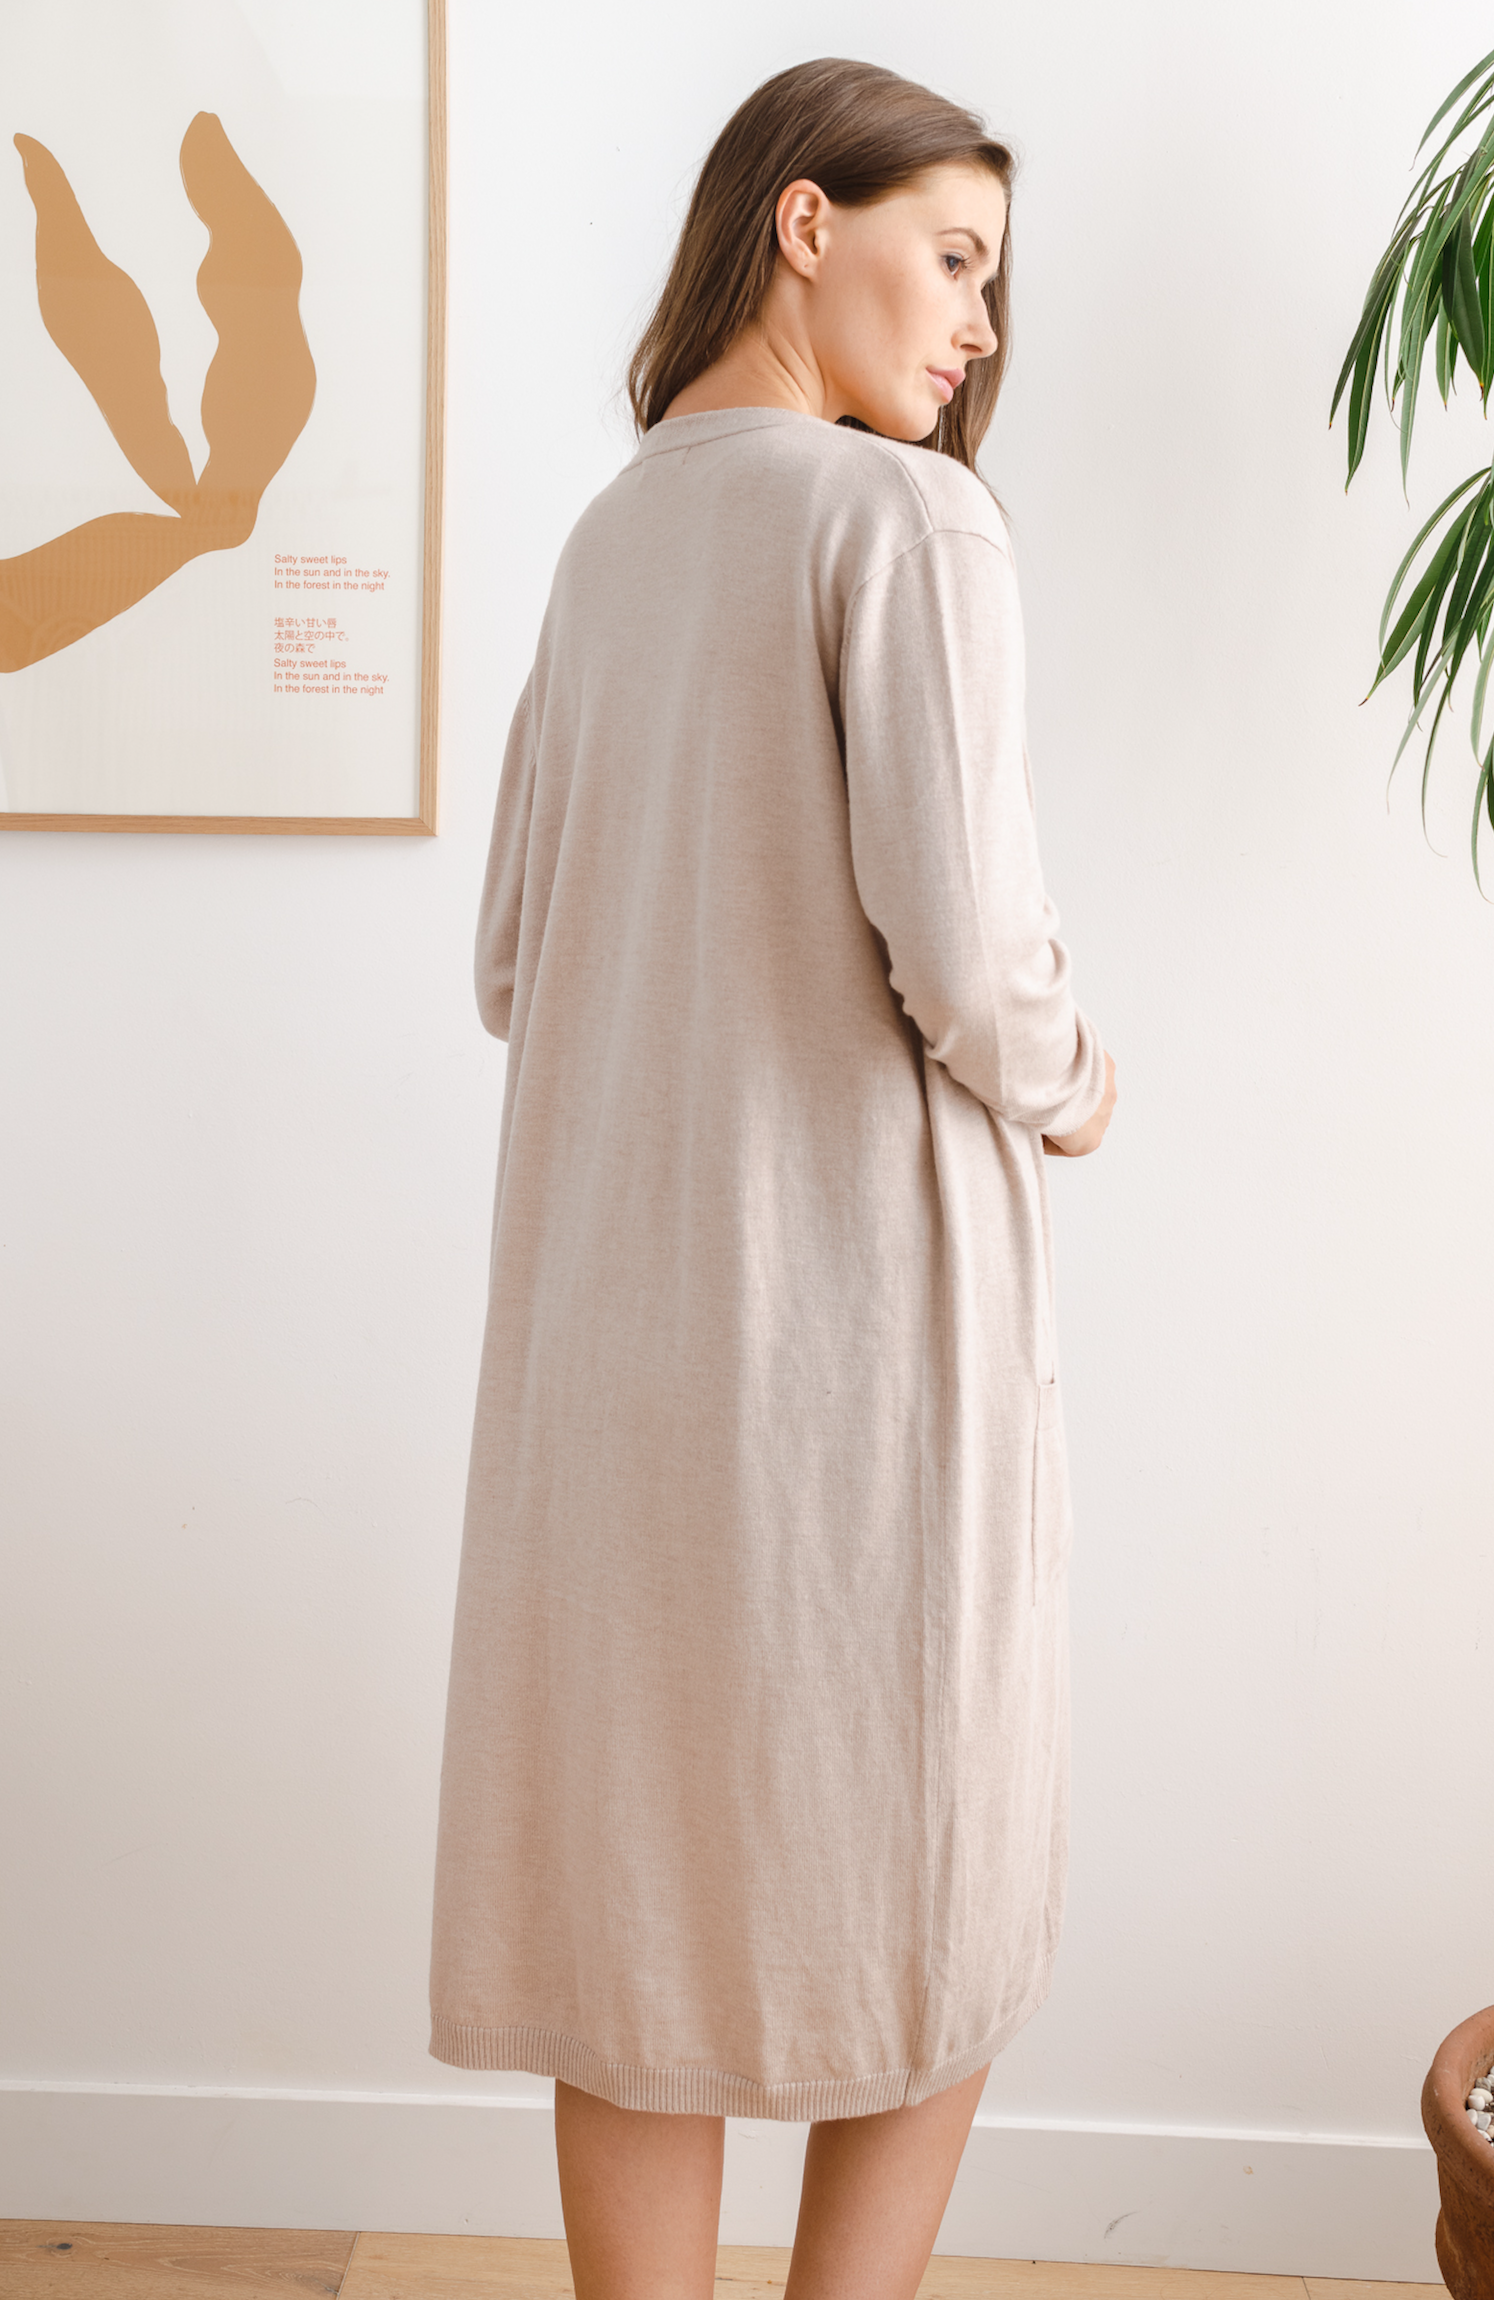 Nuzzle Clothing Shirts & Tops Wrap Duster